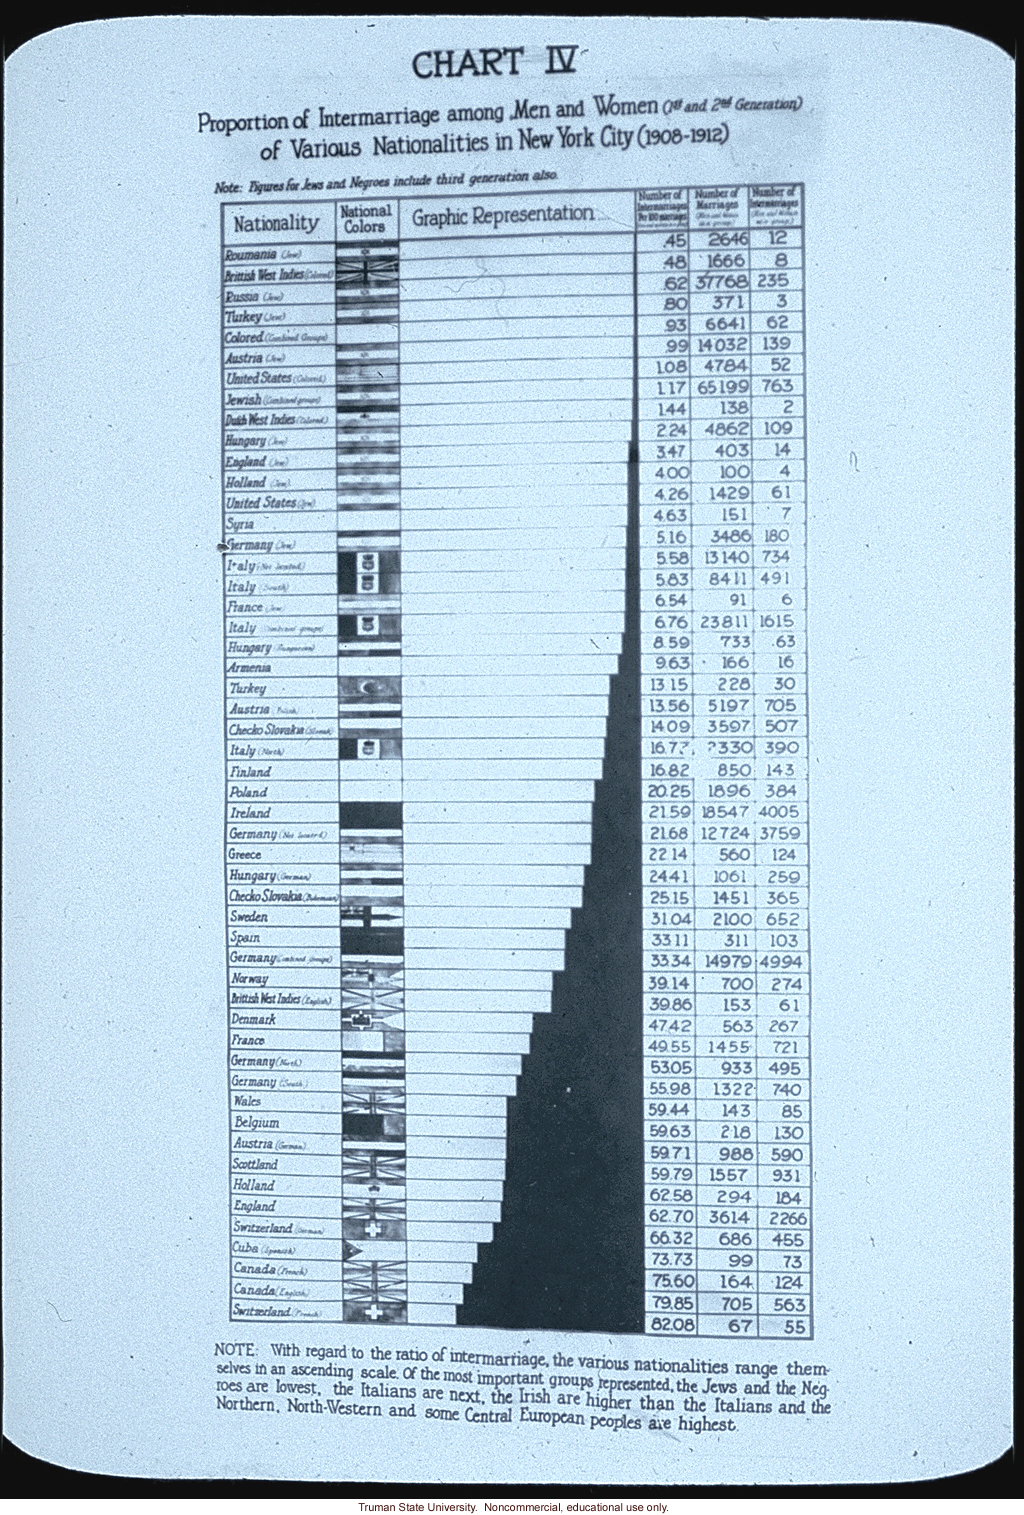 &quote;Chart IV: proportion of intermarriage among men and women of various nationalities in New York City 1908-1912&quote;